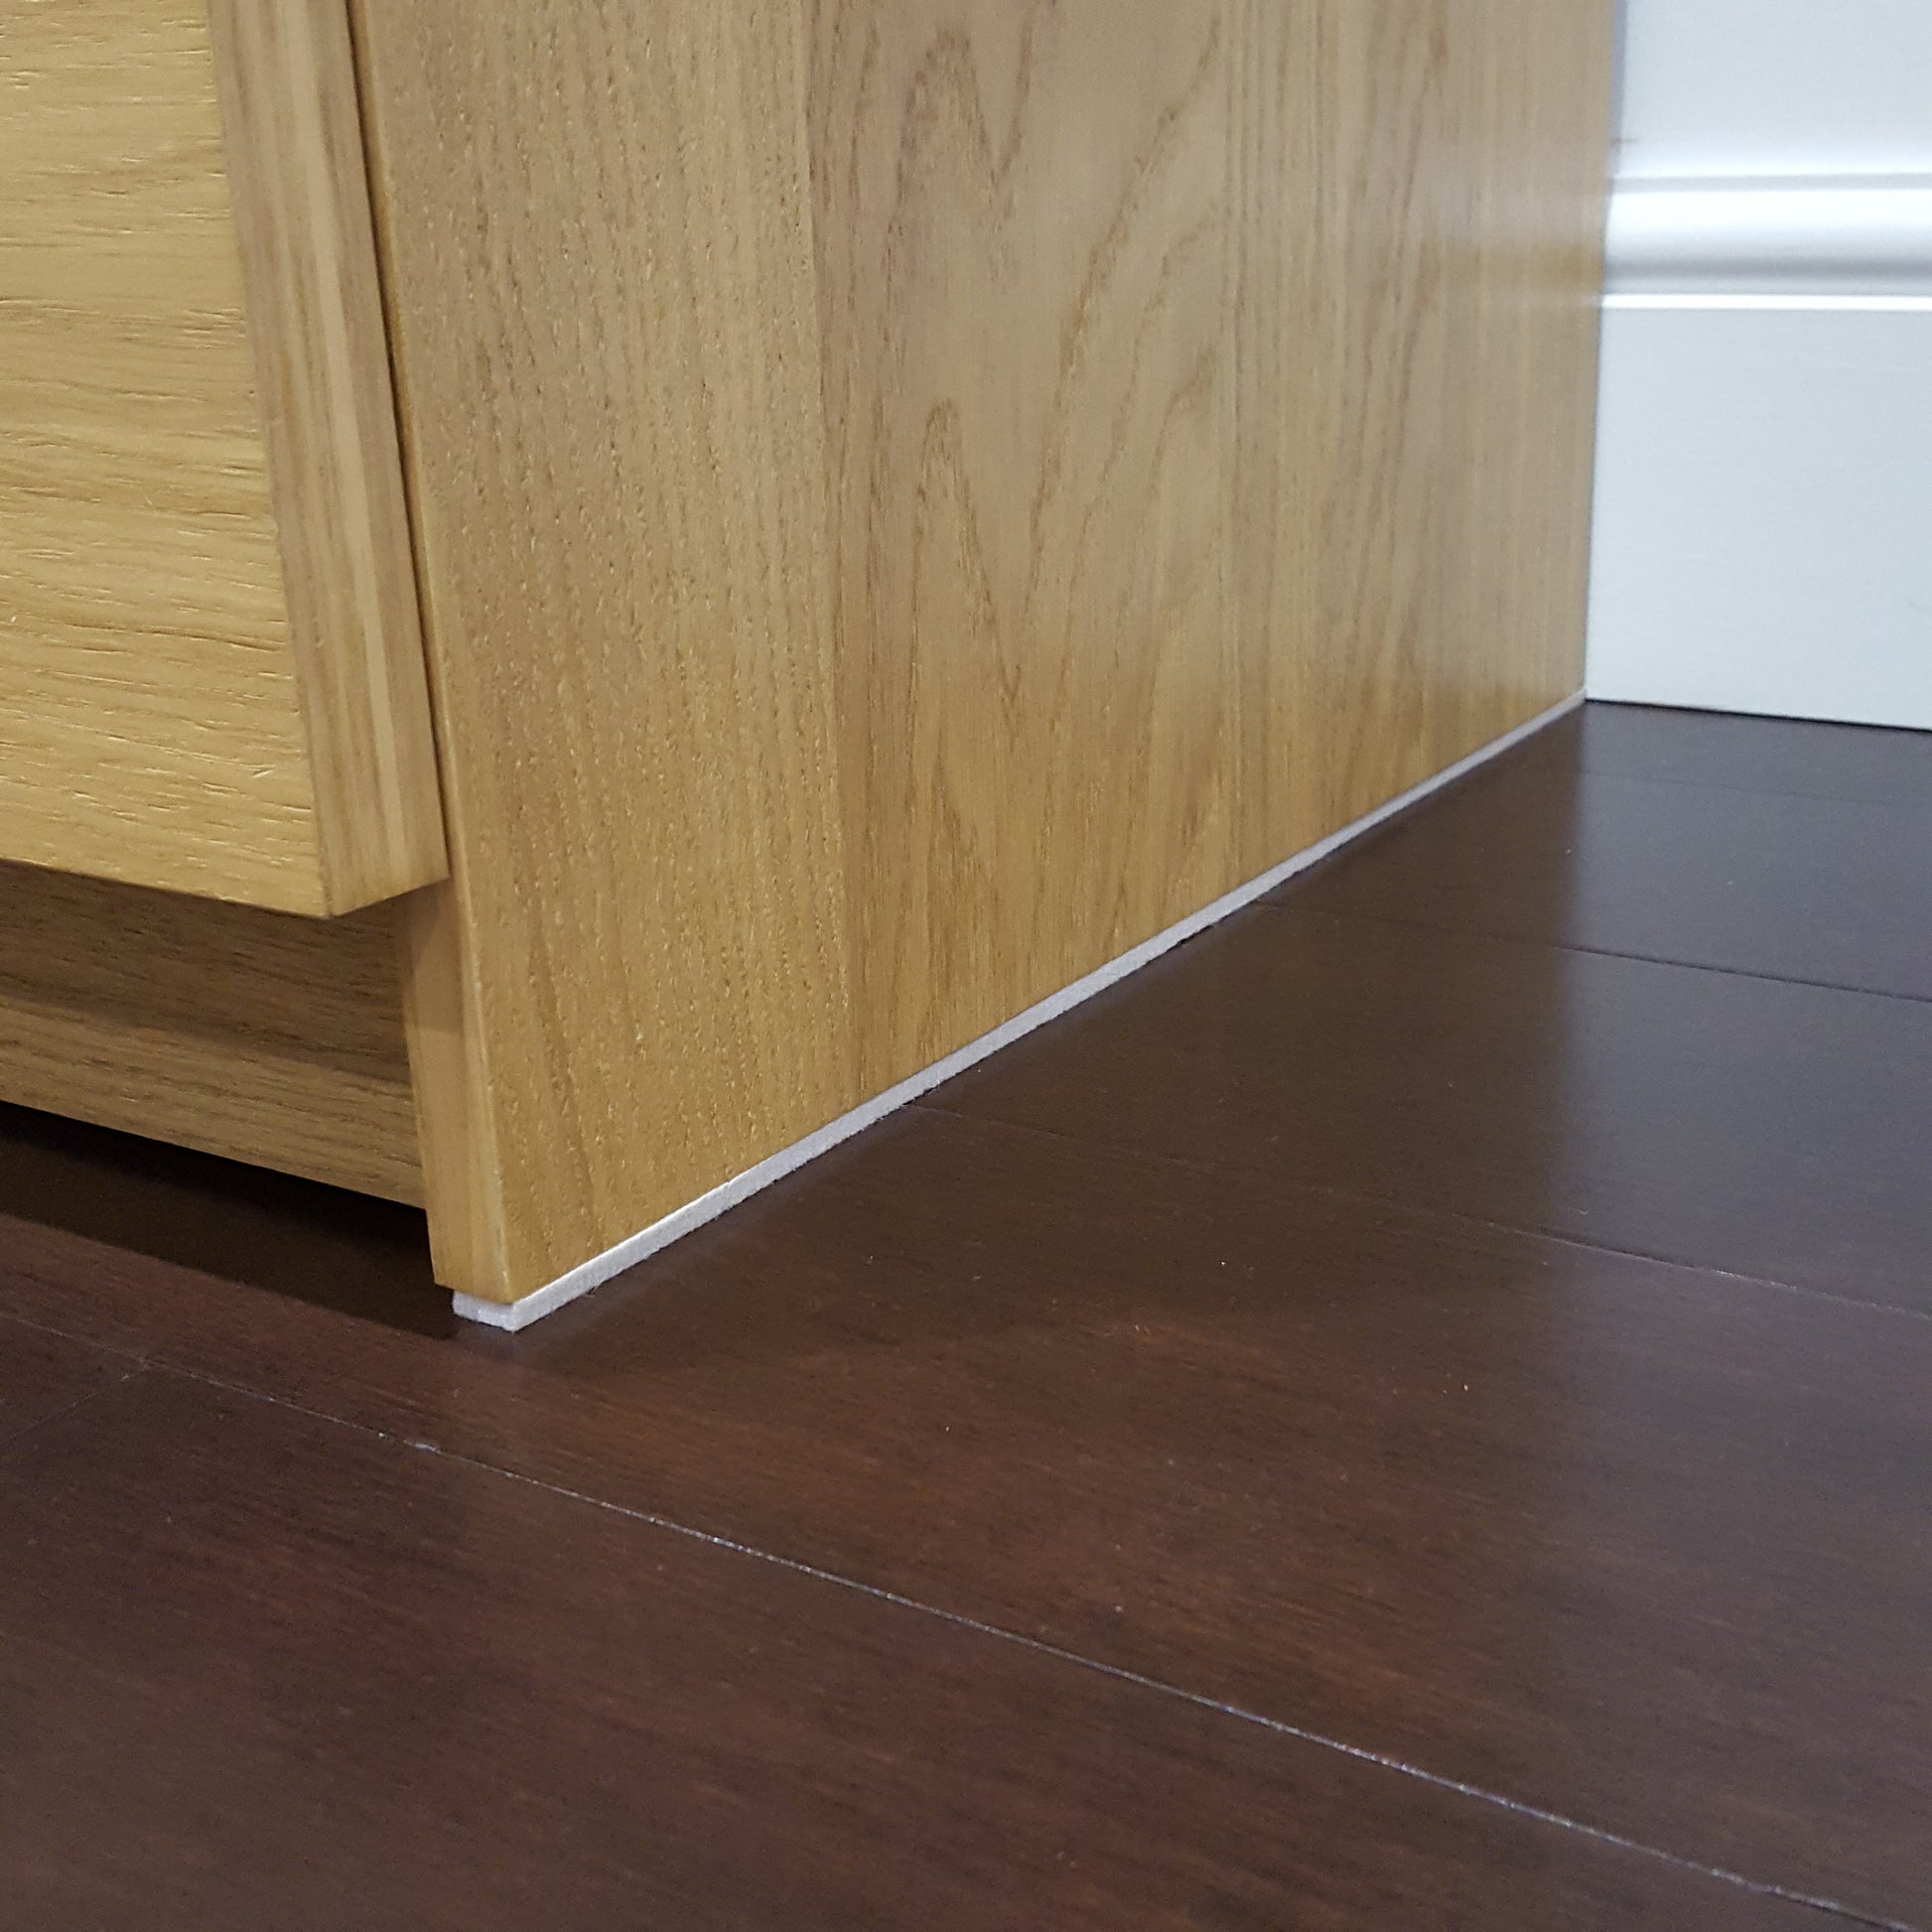 Beige furniture felt roll strip applied along the underside of floor standing drawers to provide protection from scratches